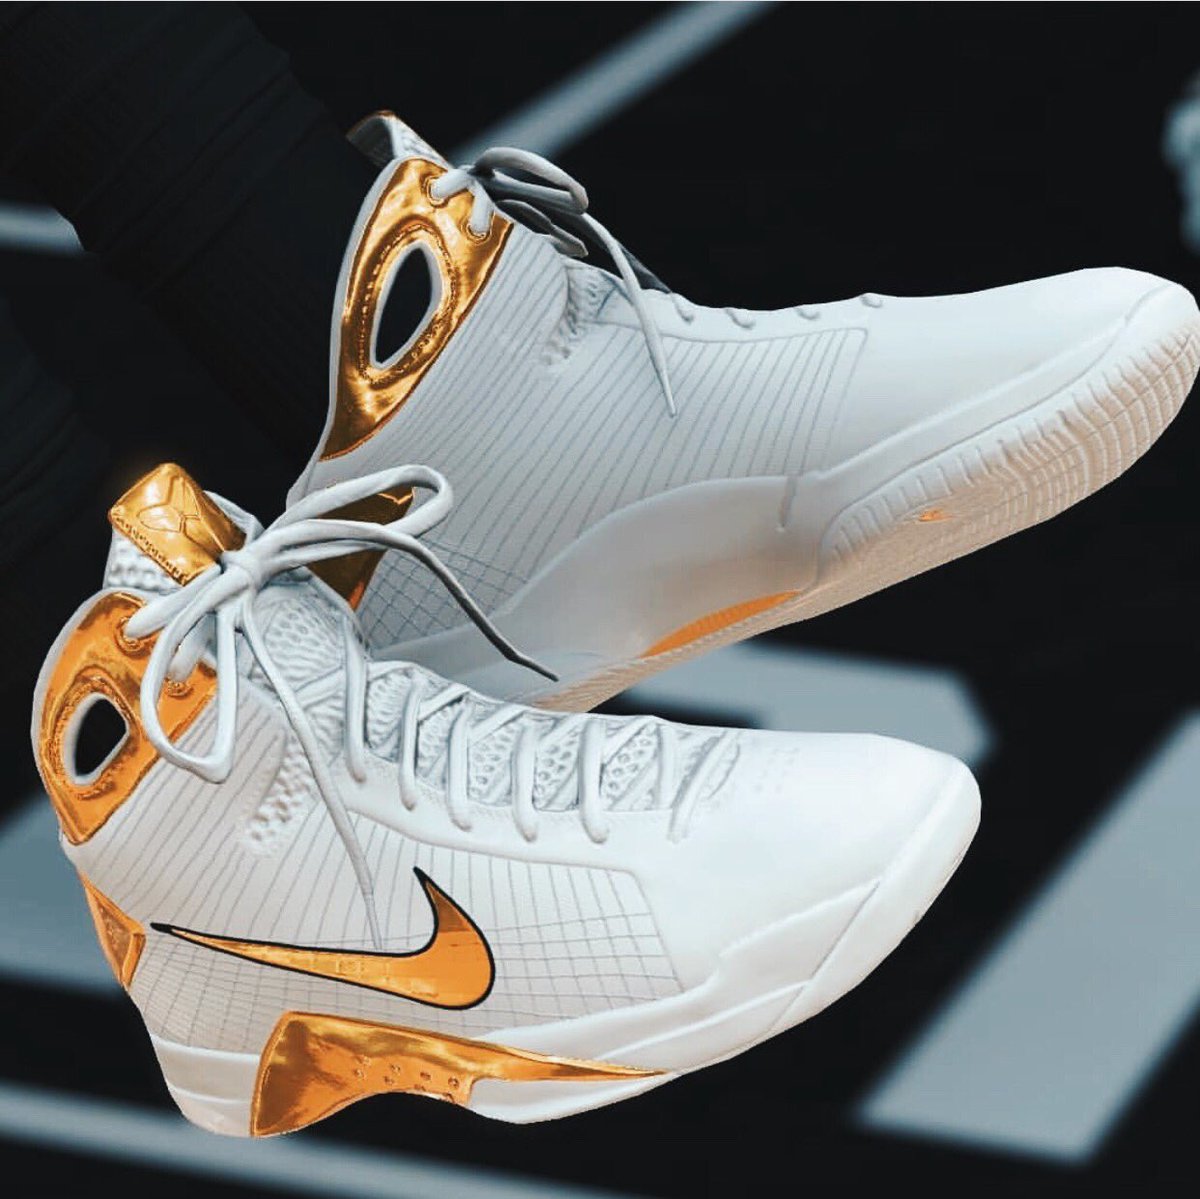 B/R Kicks on X: special Nike Hyperdunk 2008 colorway in celebration of the year anniversary of the shoe and Hyperdunk X https://t.co/KQGqEb1LFQ" / X